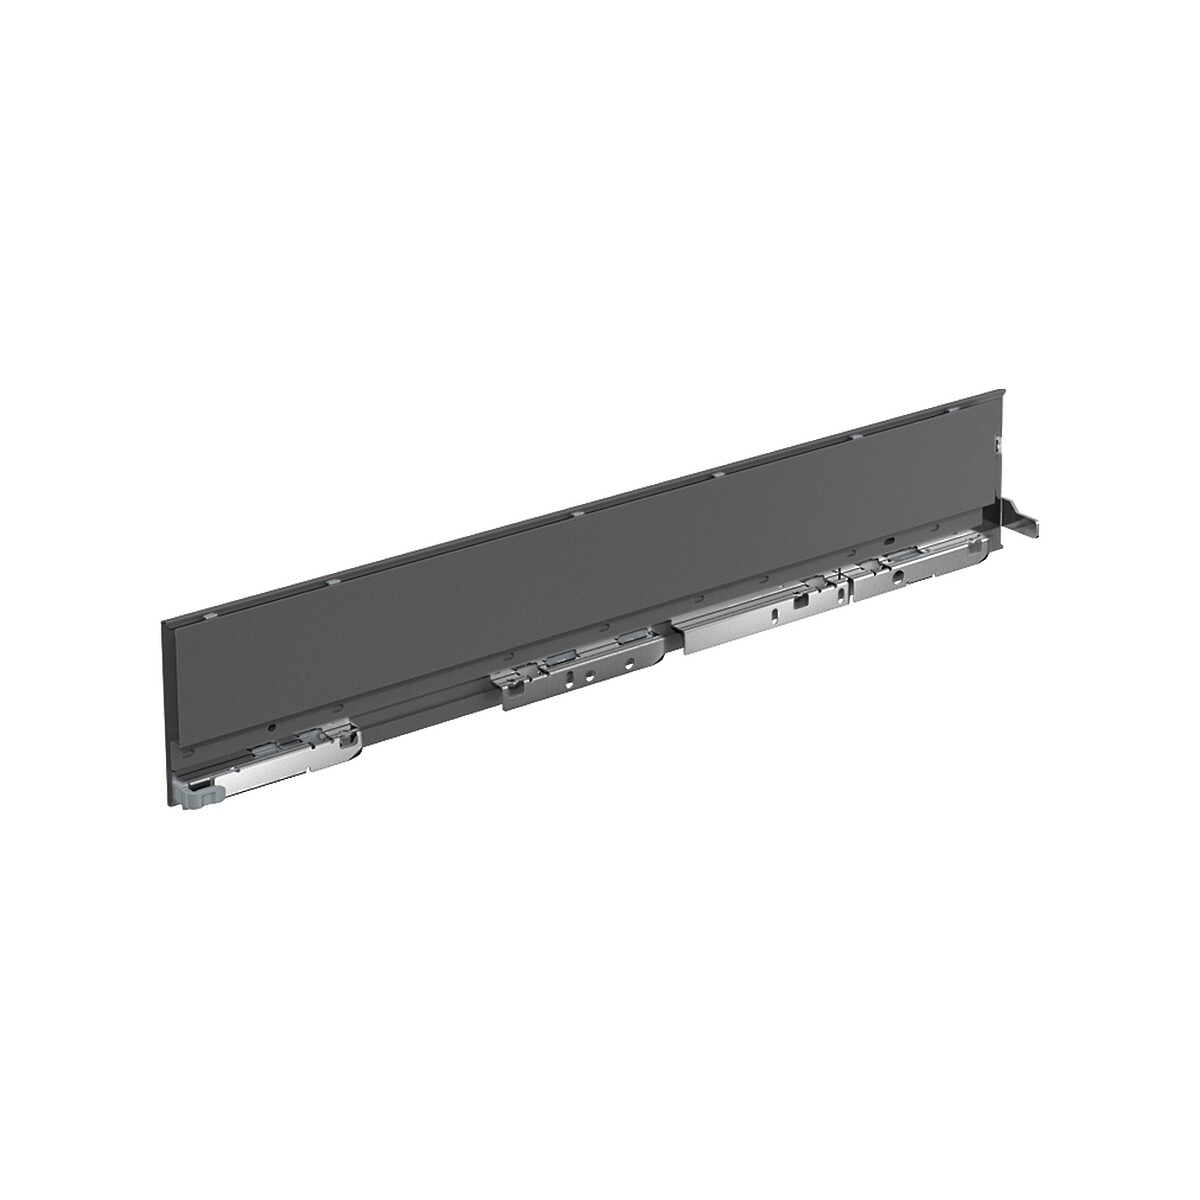 AvanTech YOU Drawer side profile, height 101 mm x NL 300 mm, Anthracite, Right